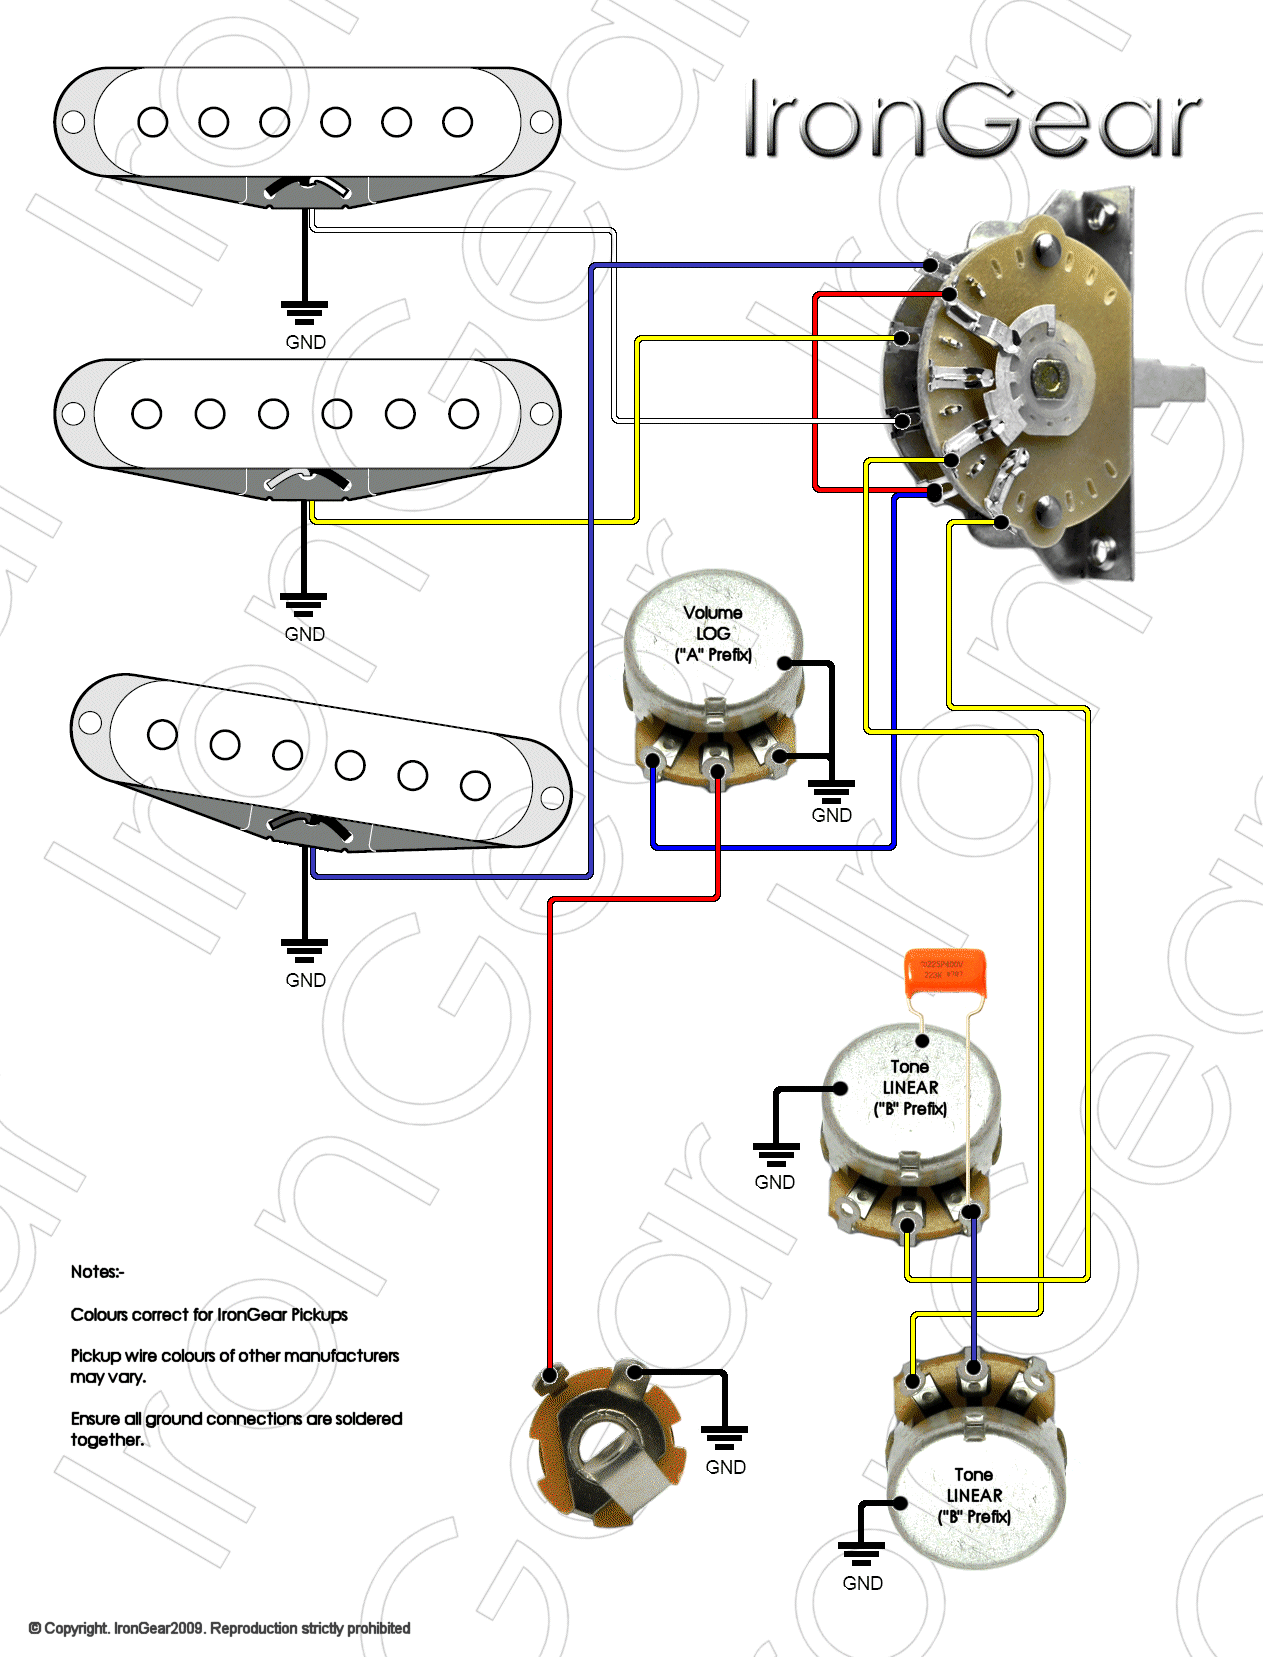 Wiring Diagram For Telecaster With 3 Pickups And A 5 Way Switch from www.axetec.co.uk